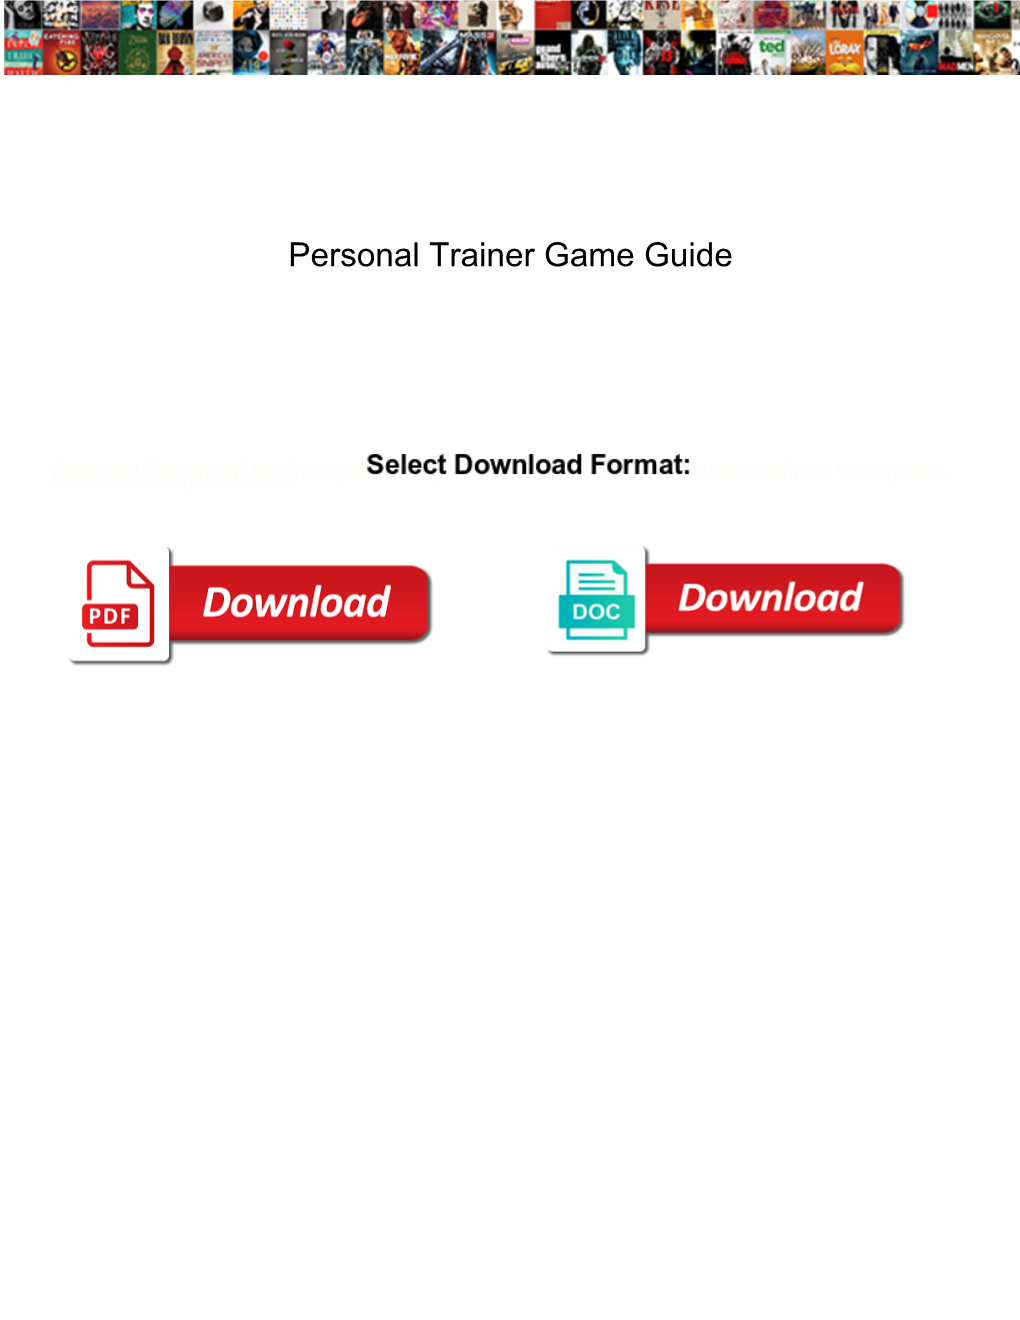 Personal Trainer Game Guide